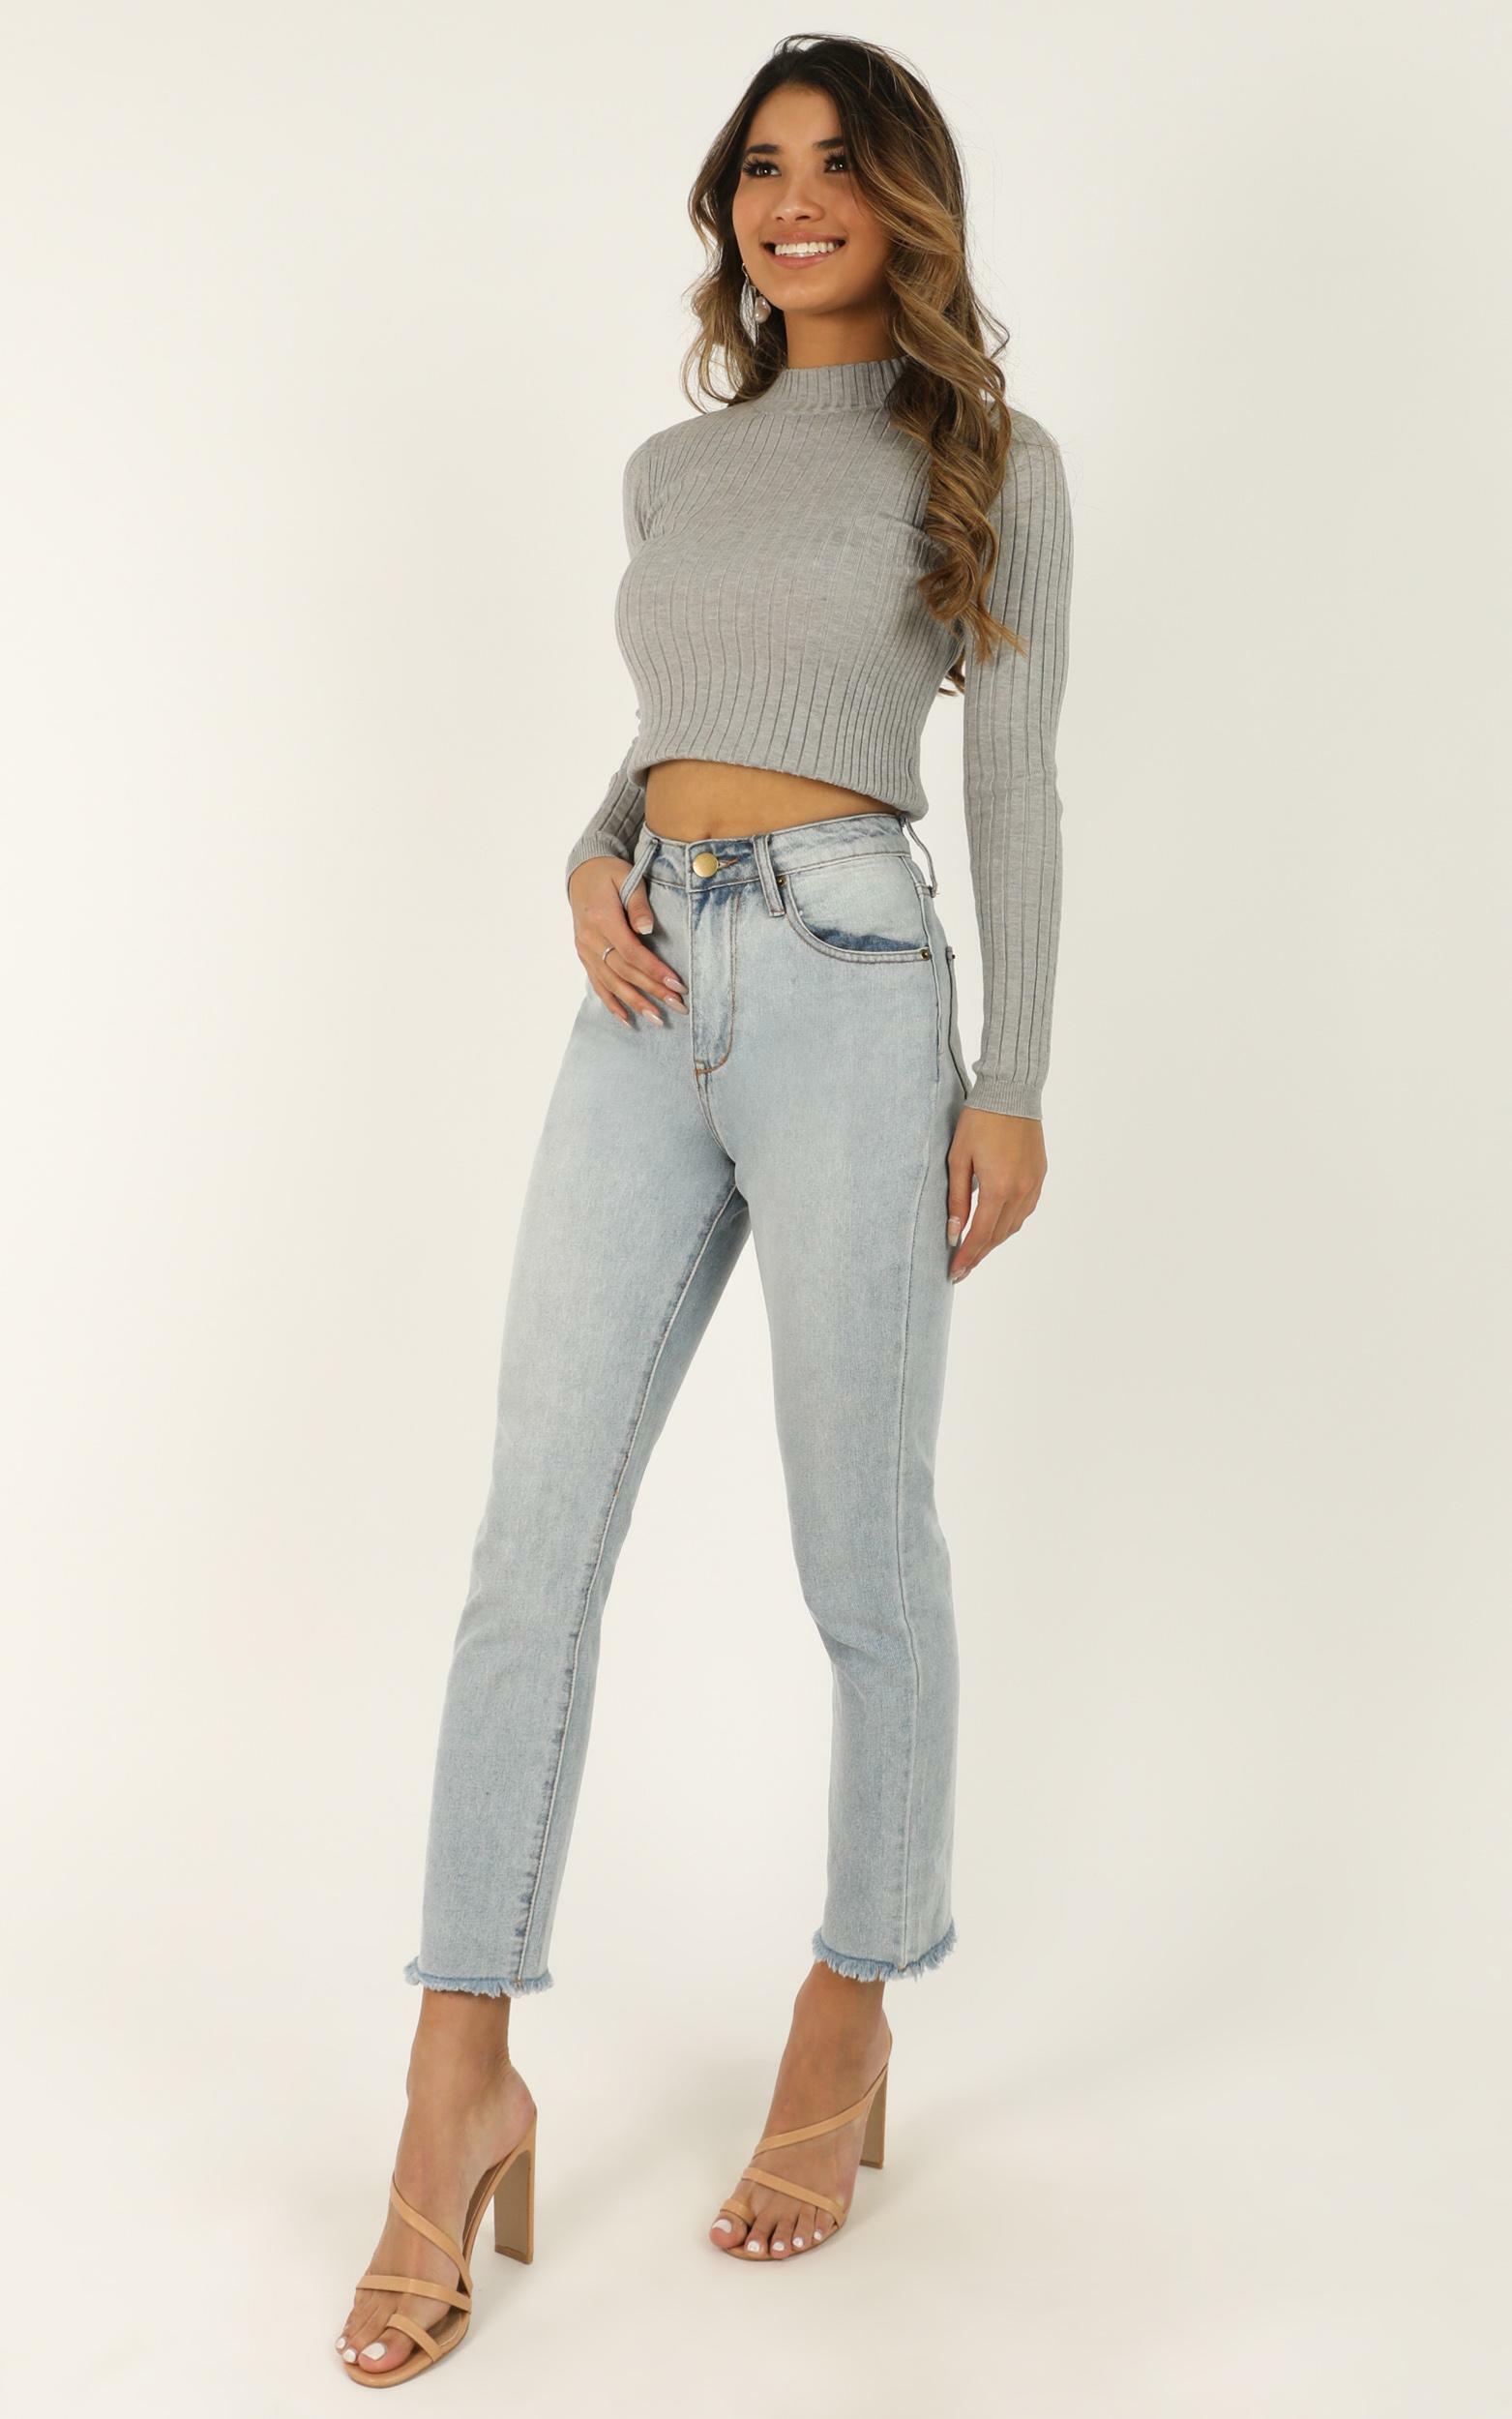 Downtown dreams knit top in grey - 8 (S), Grey, hi-res image number null